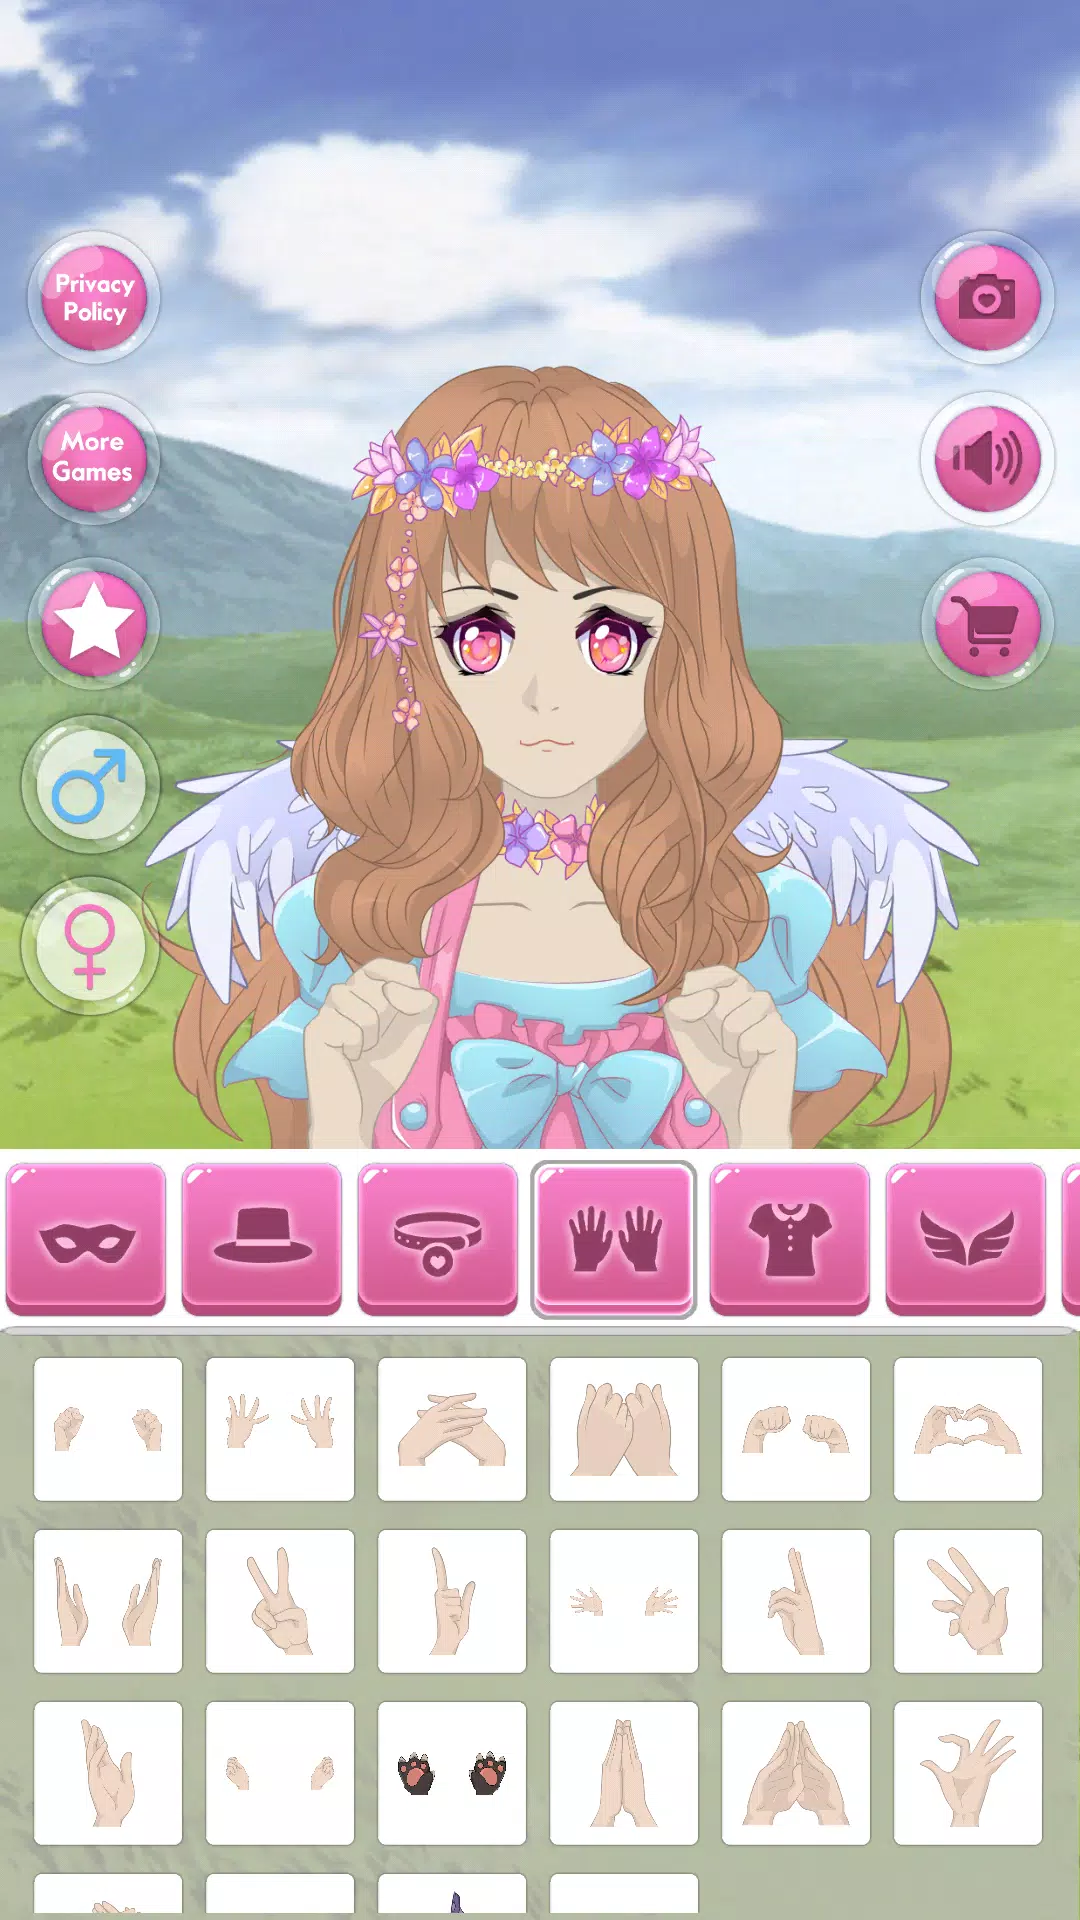 🔥 Download Avatar Maker Anime Girls 3.6.1 [Adfree] APK MOD. Application  for creating beautiful anime characters 